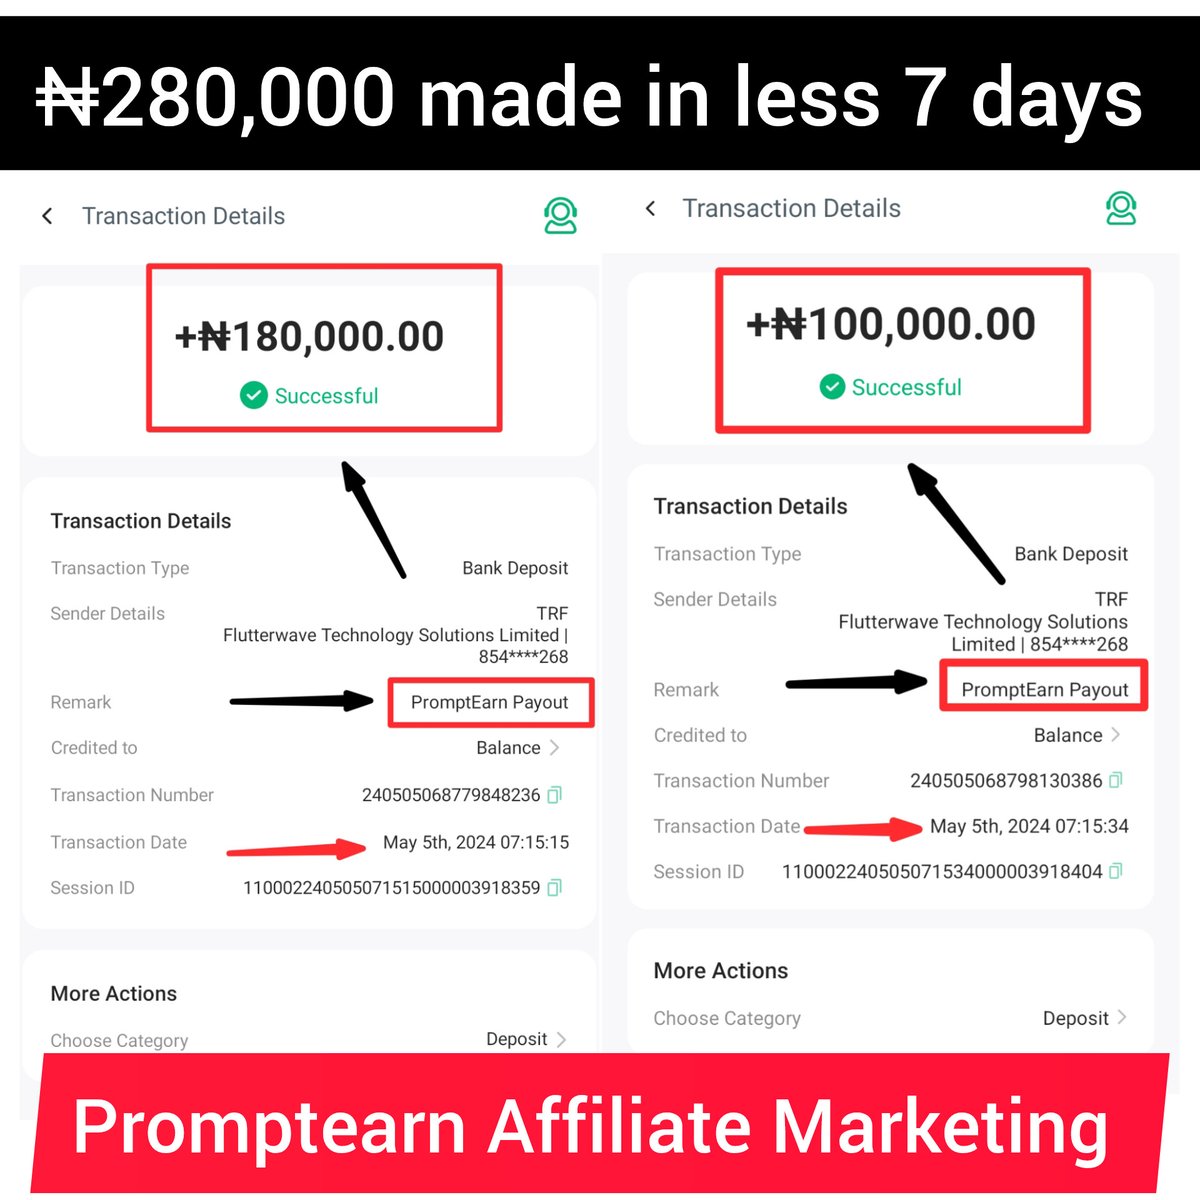 After receiving 1.9 million naira from Promptearn Affiliate Marketing earlier this week Here's an extra 280k Again made in one week from Promptearn Thank you @promptearn @MartinsOsimen_ & @BamsonOfficial Coach Uwemgo